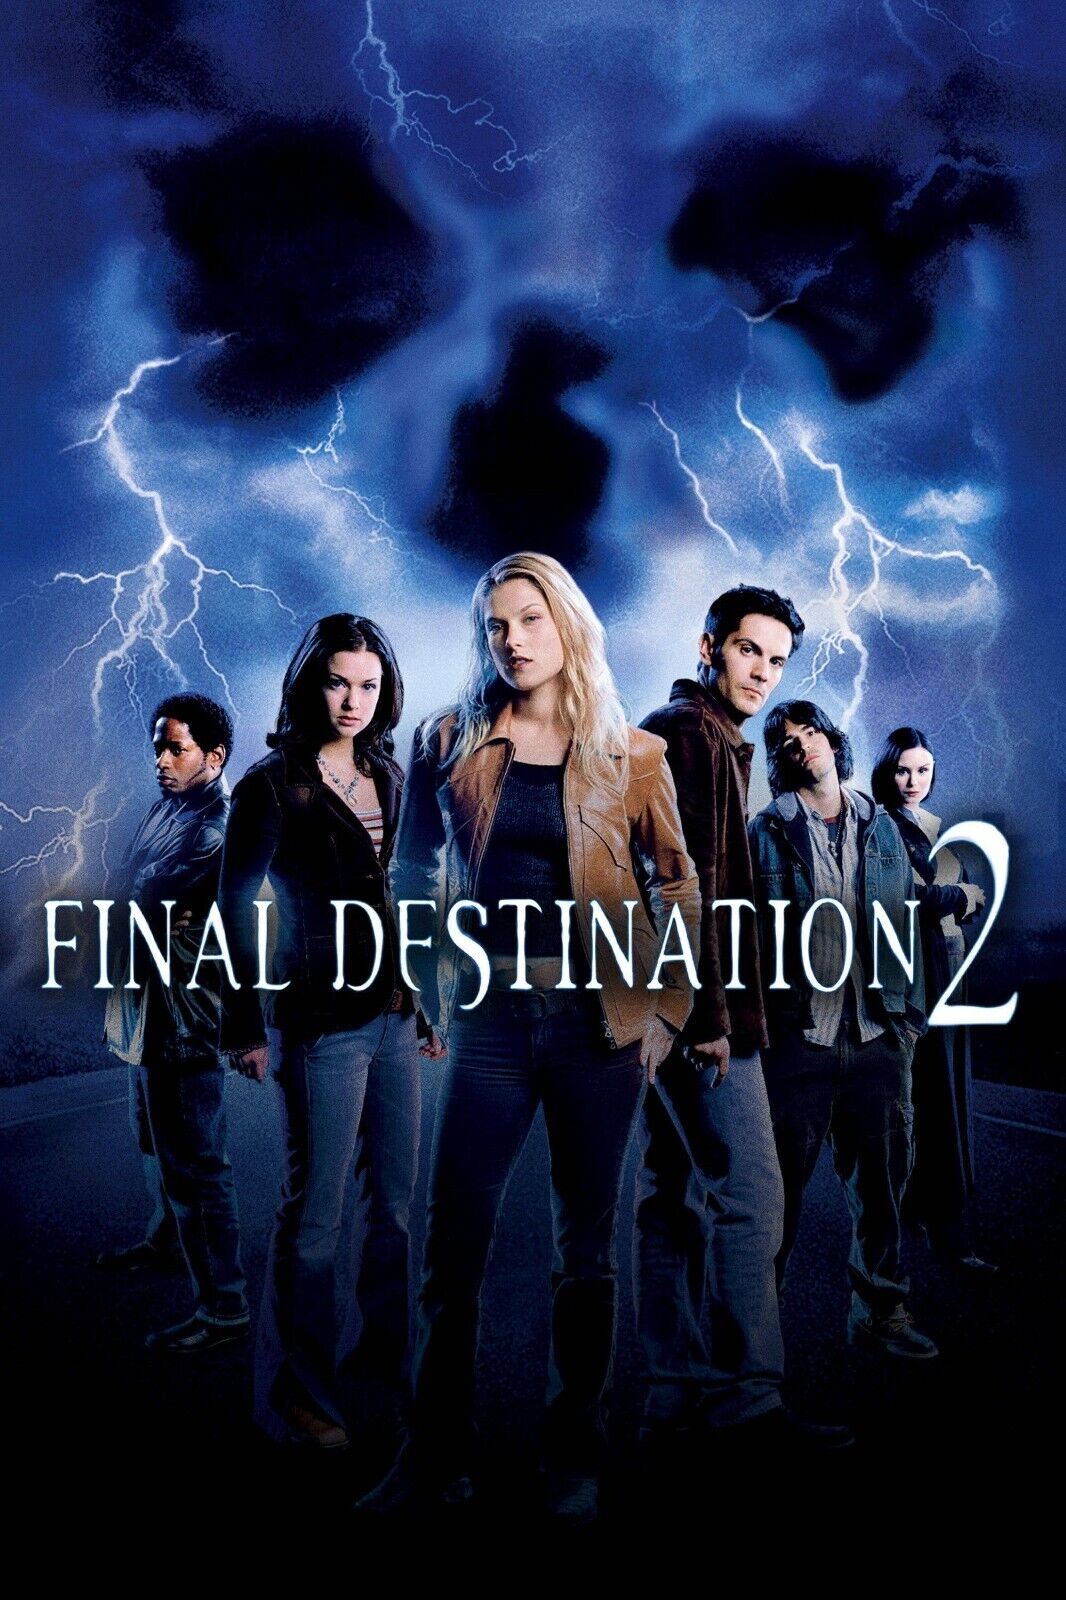 Final Destination 2 Movie Poster 2003 - 11x17 Inches | NEW USA